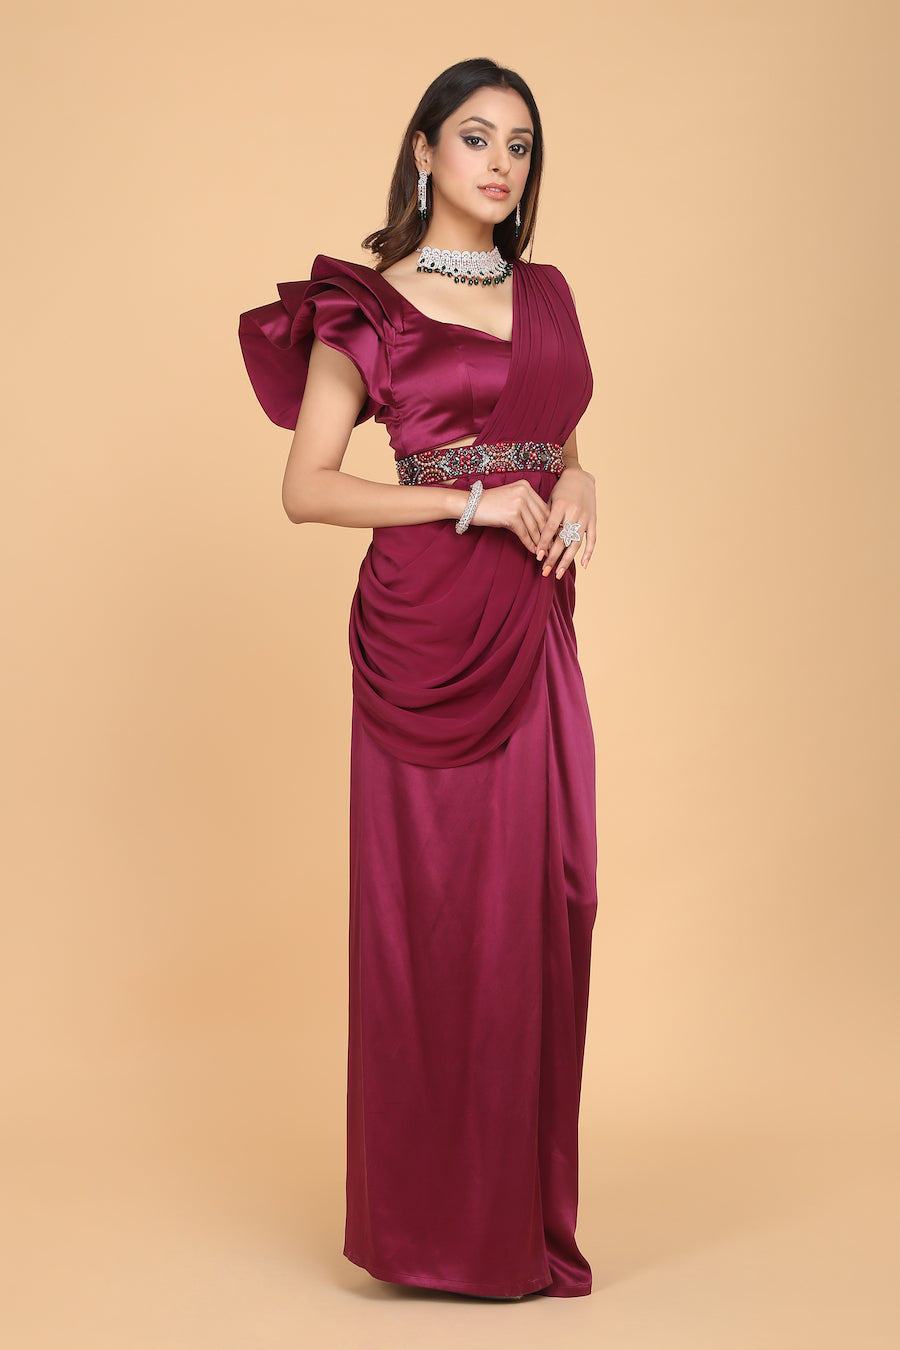 Ruffled Satin Blouse With Embellished Belt And Satin/Georgette Sari